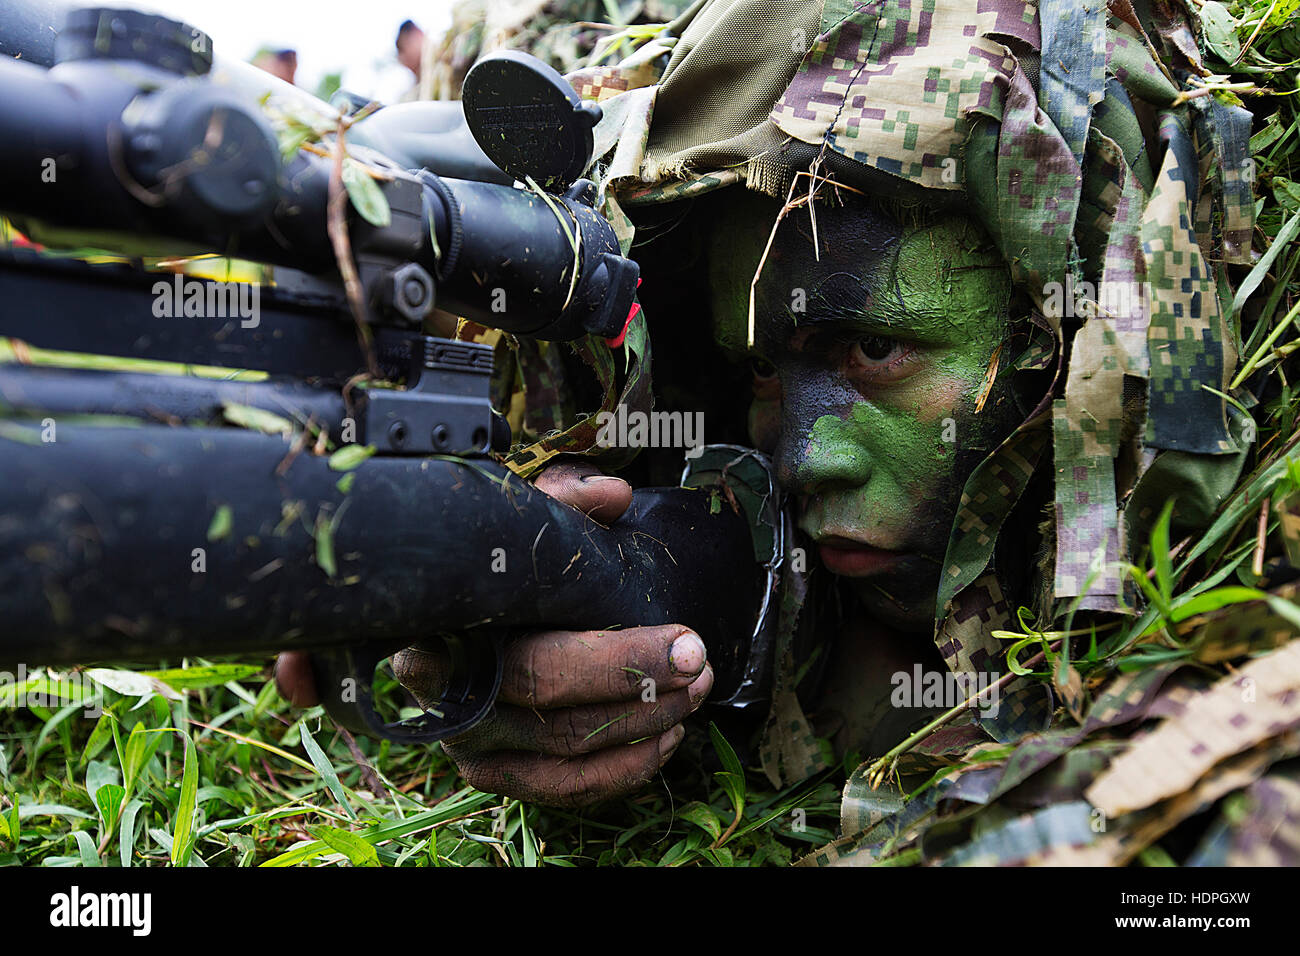 An Infanteria de Marina de Colombia scout sniper soldier sights in at a demonstration during the Marine Leaders of the Americas Conference at the Marine Infantry Training Base August 27, 2015 in Covenas, Colombia. Stock Photo